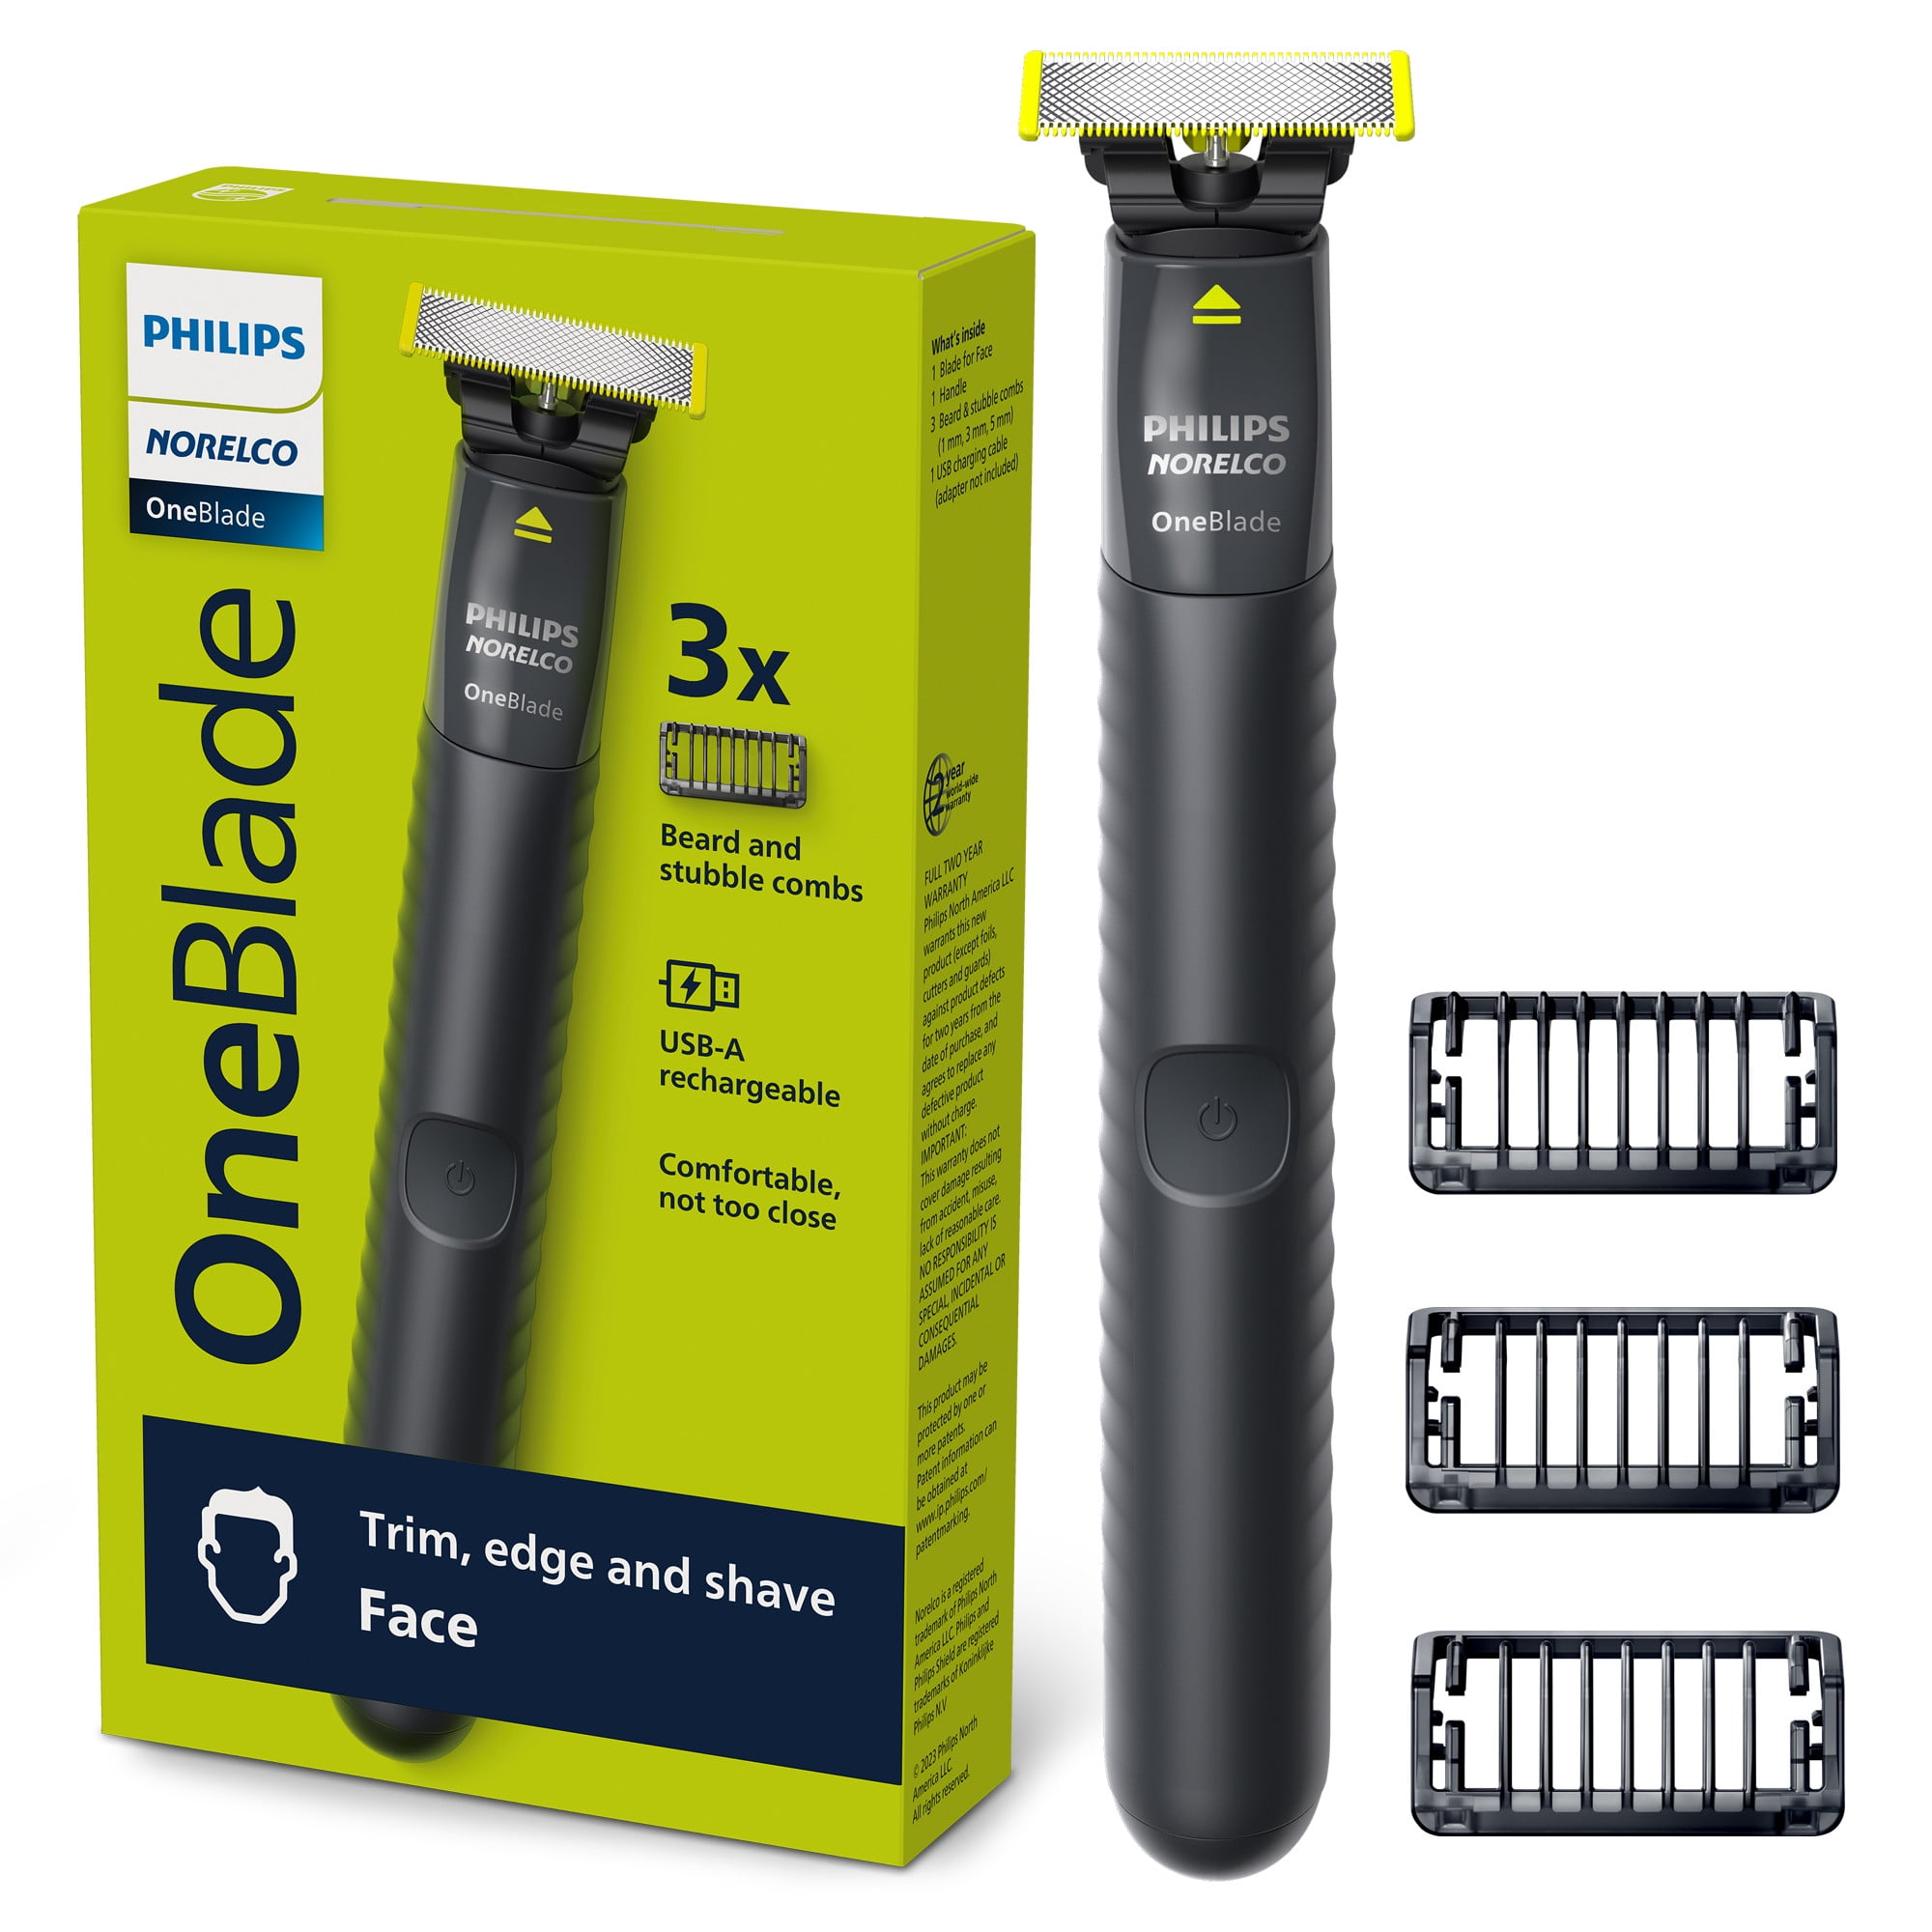 Philips Norelco - OneBlade 360, Pro Face & Body, Hybrid Electric Trimmer  and Shaver, QP6551/70 - Chrome 